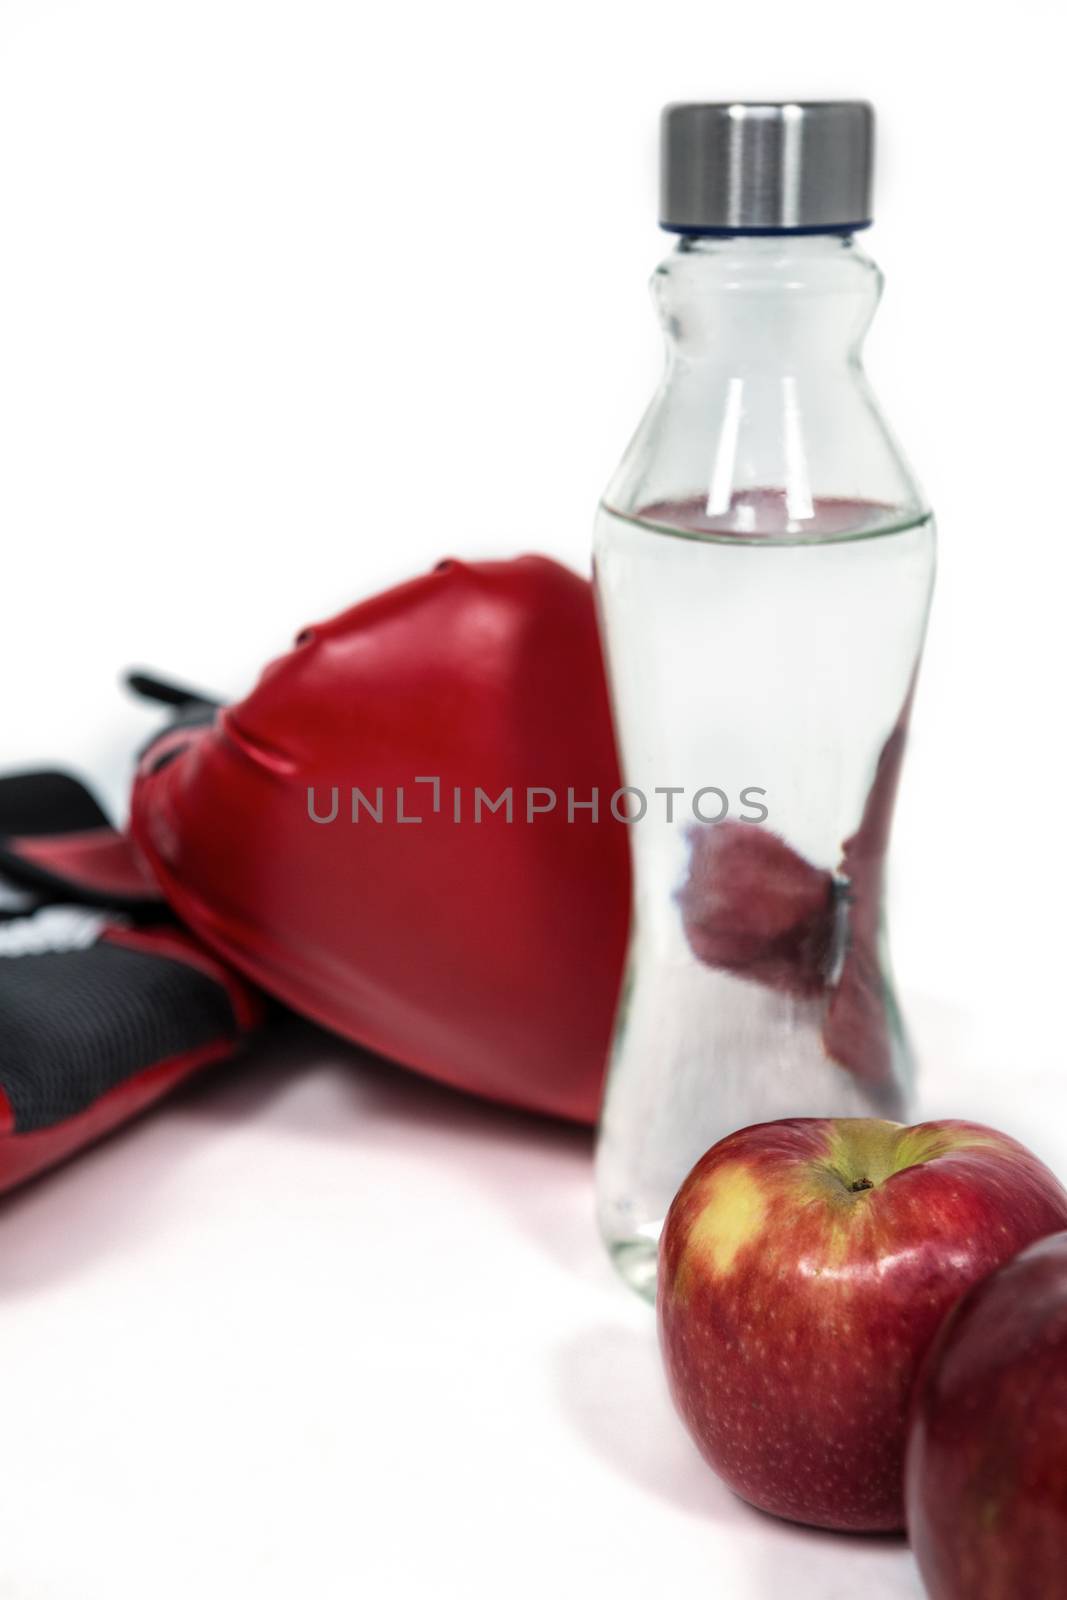 Ingredients for a healthy lifestyle on white background